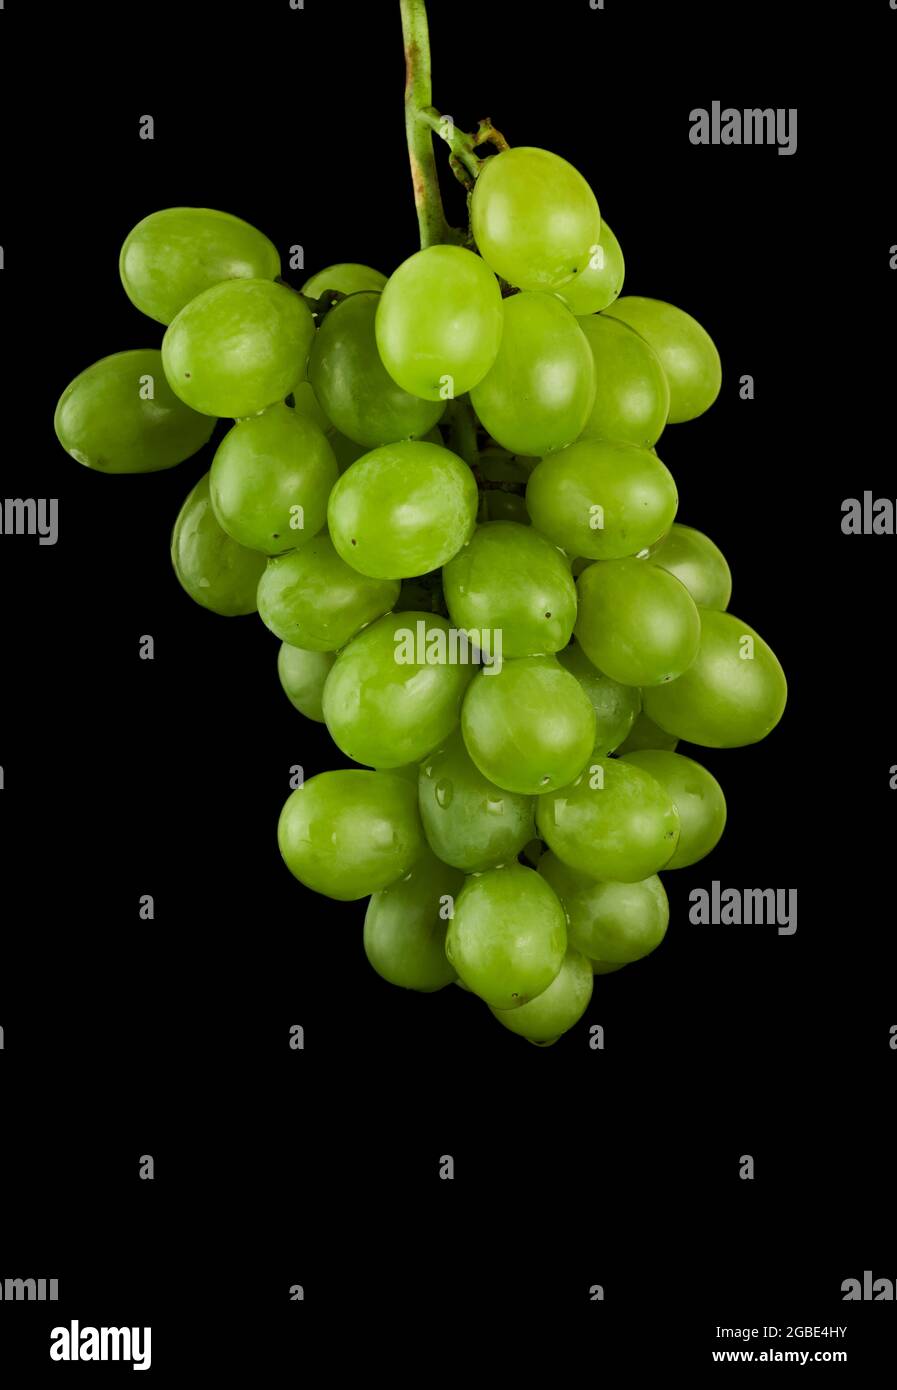 A bunch of table grapes, white pouring, on a black background isolated Stock Photo